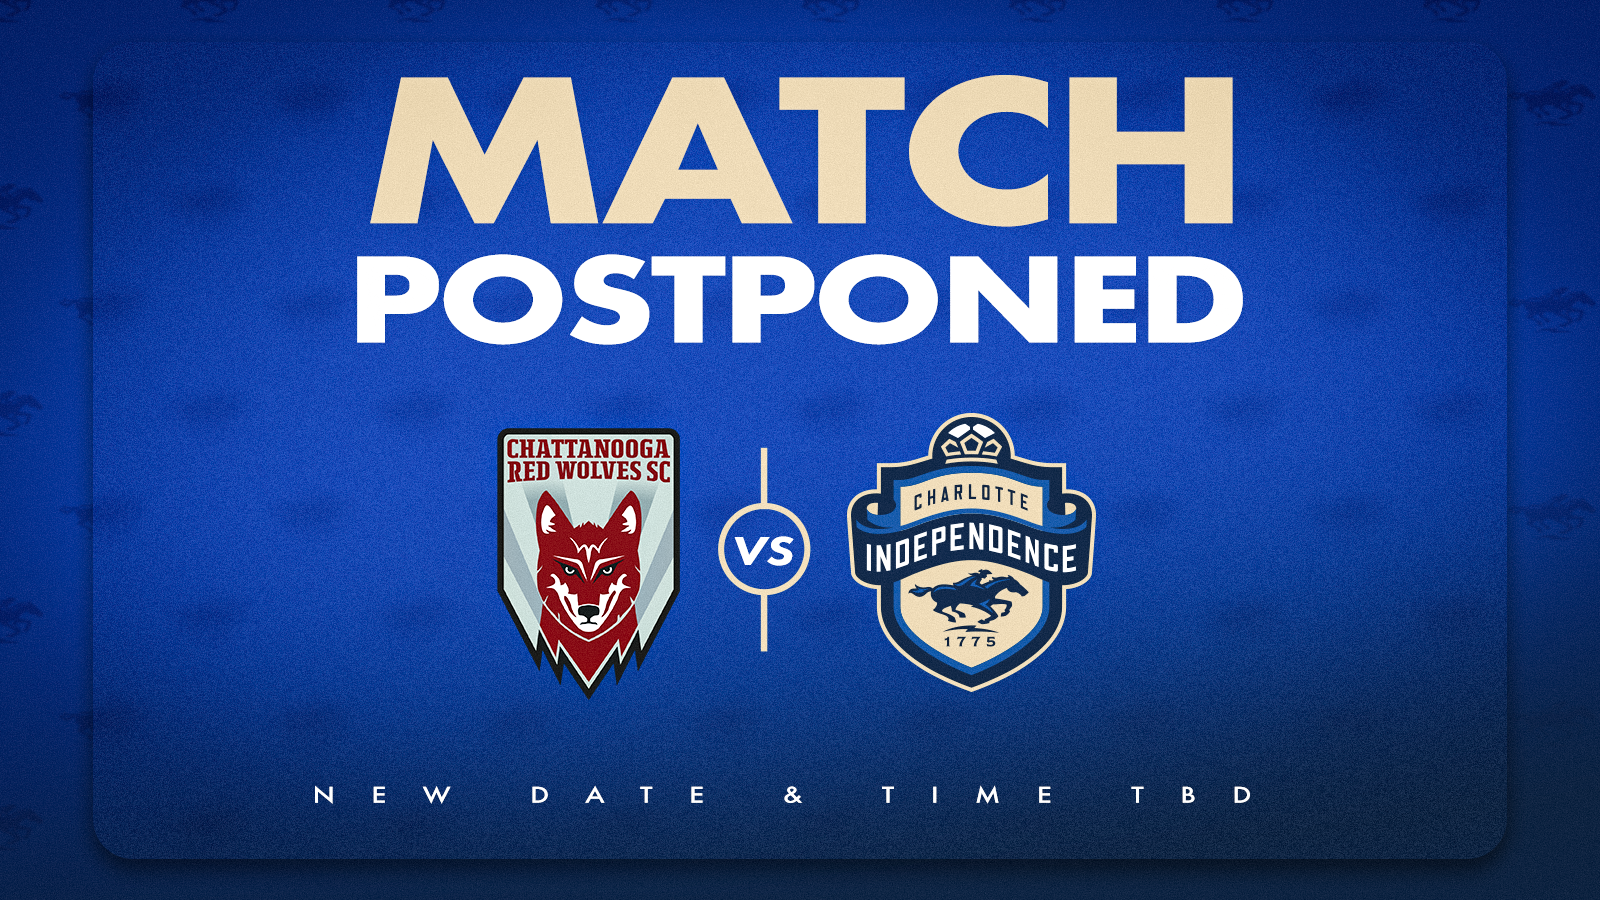 Independence Match at Chattanooga Red Wolves Postponed featured image